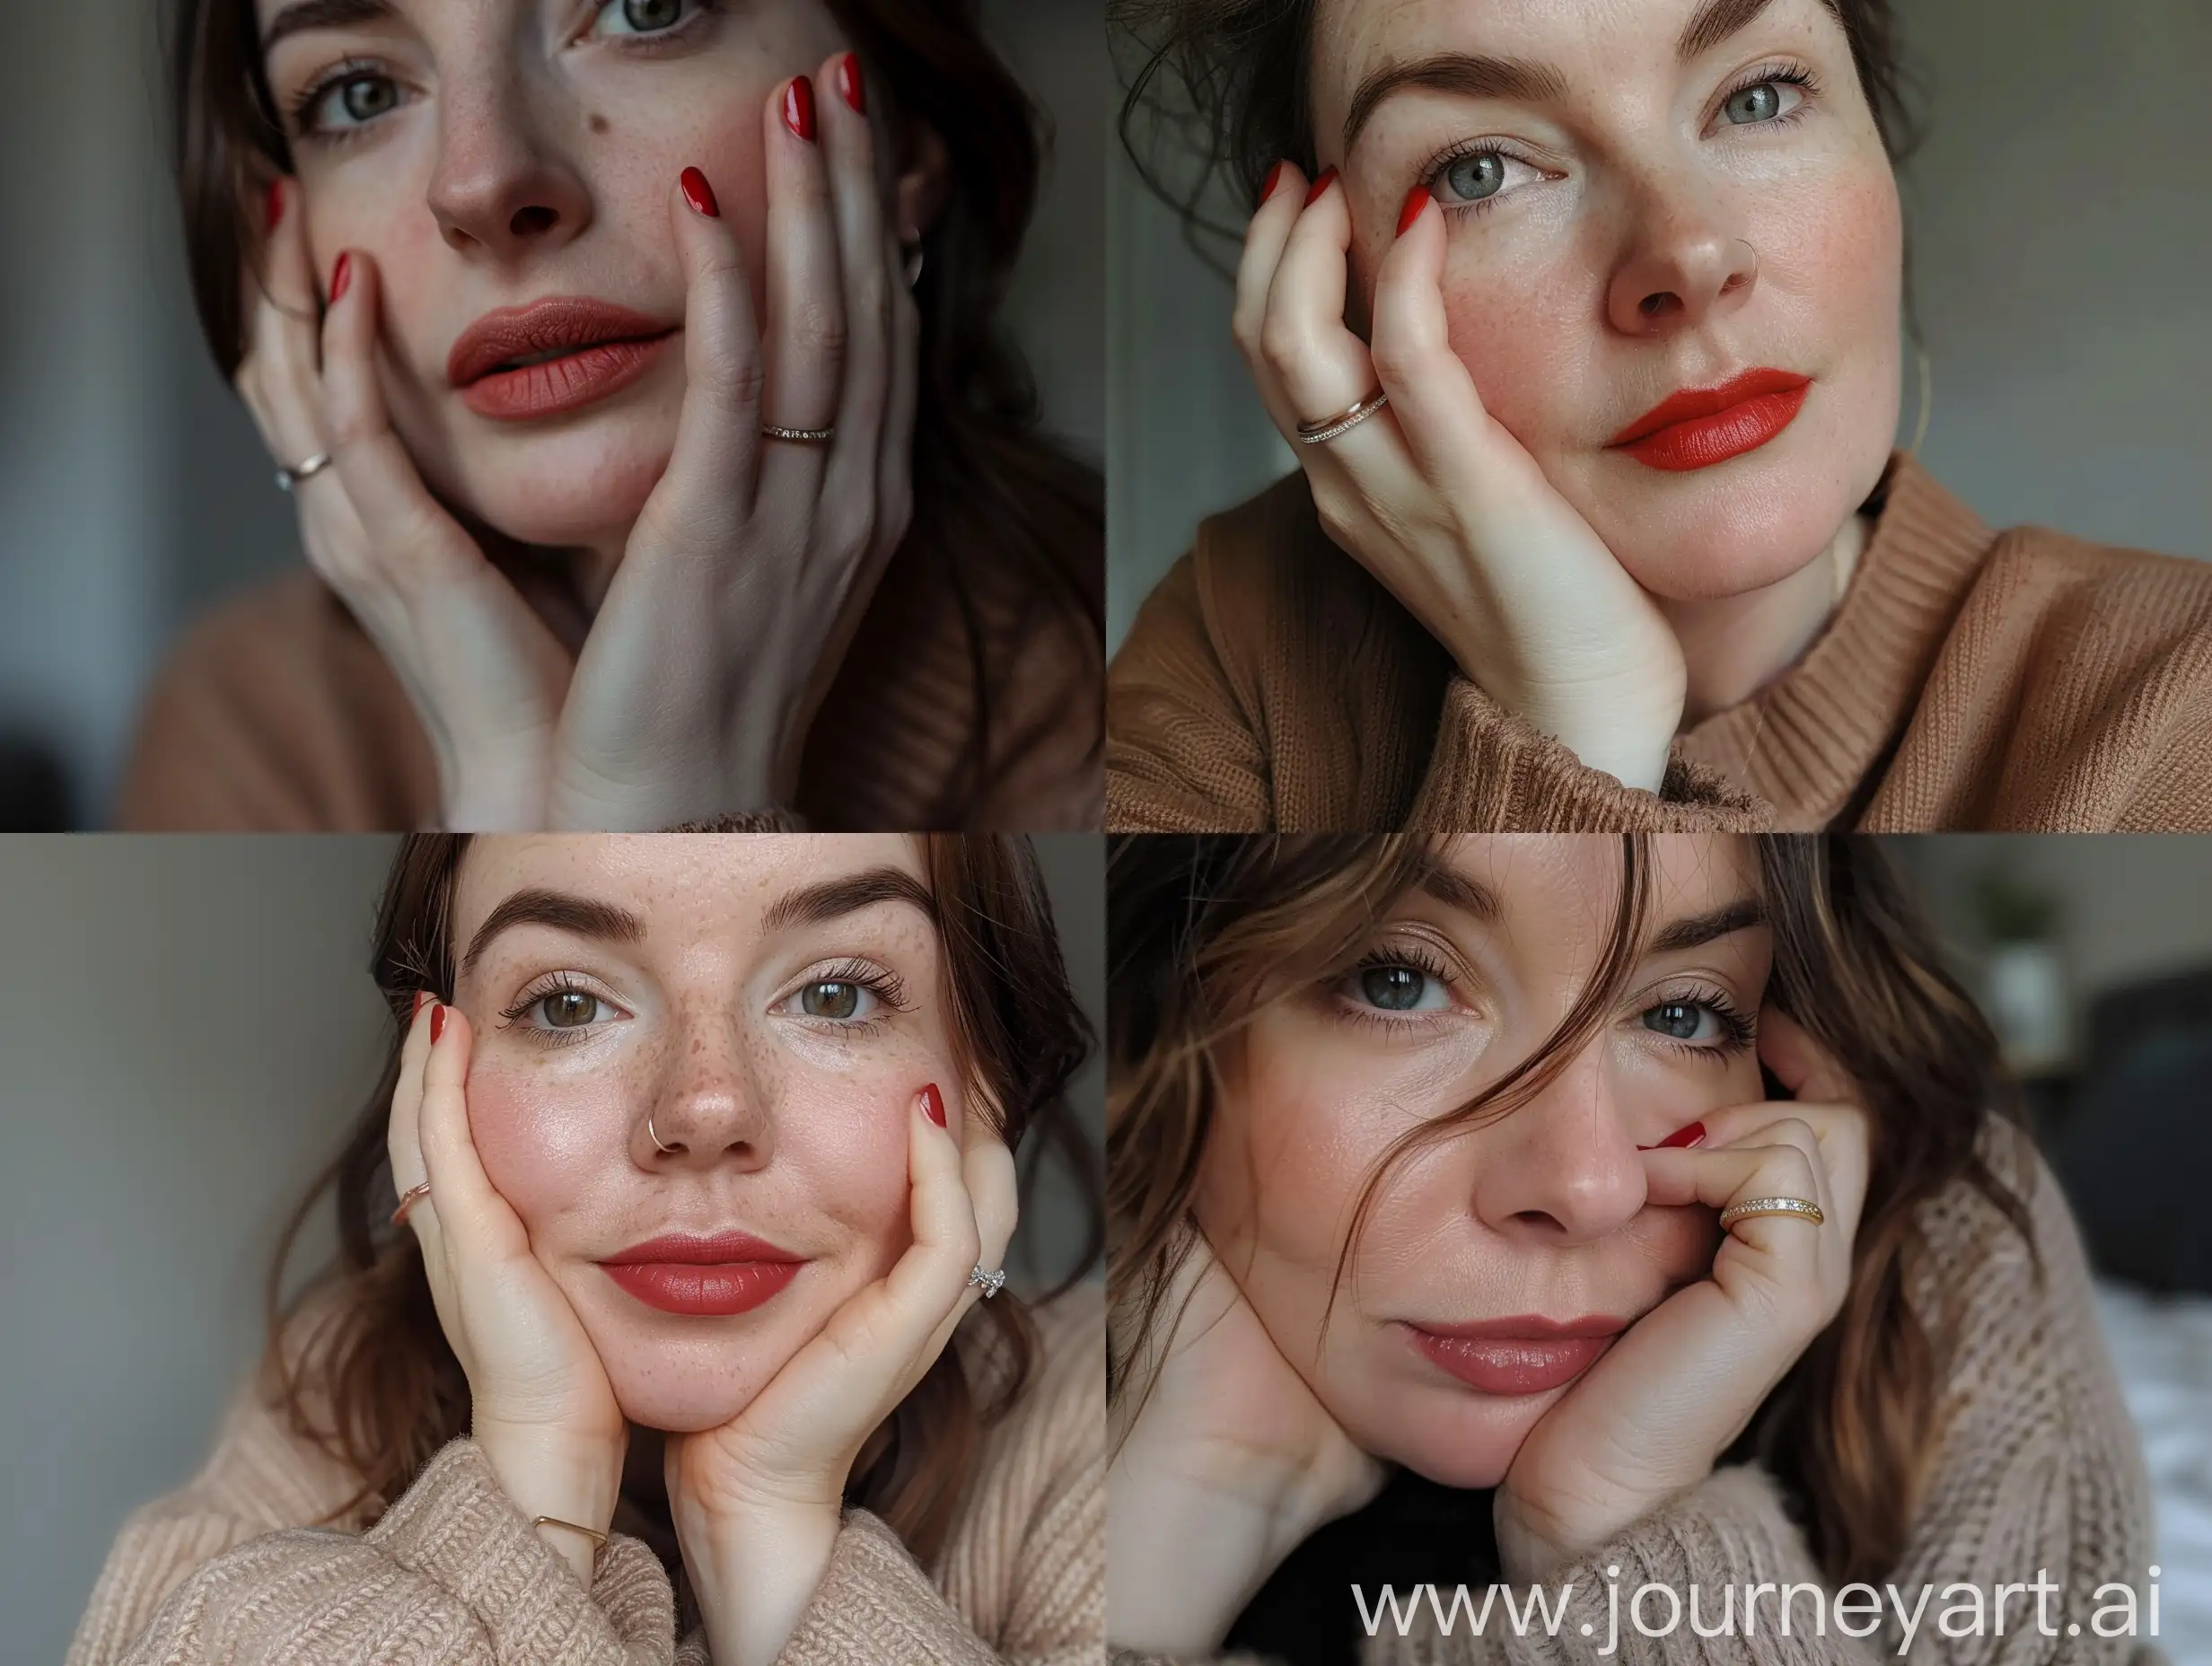 Aesthetic instagram selfie of a mother in her mid 30's, hands resting on face, wedding ring, red gel nail polish, British, matte brown makeup, lipstick, London flat, motherly face in selfie, close up of face selfie